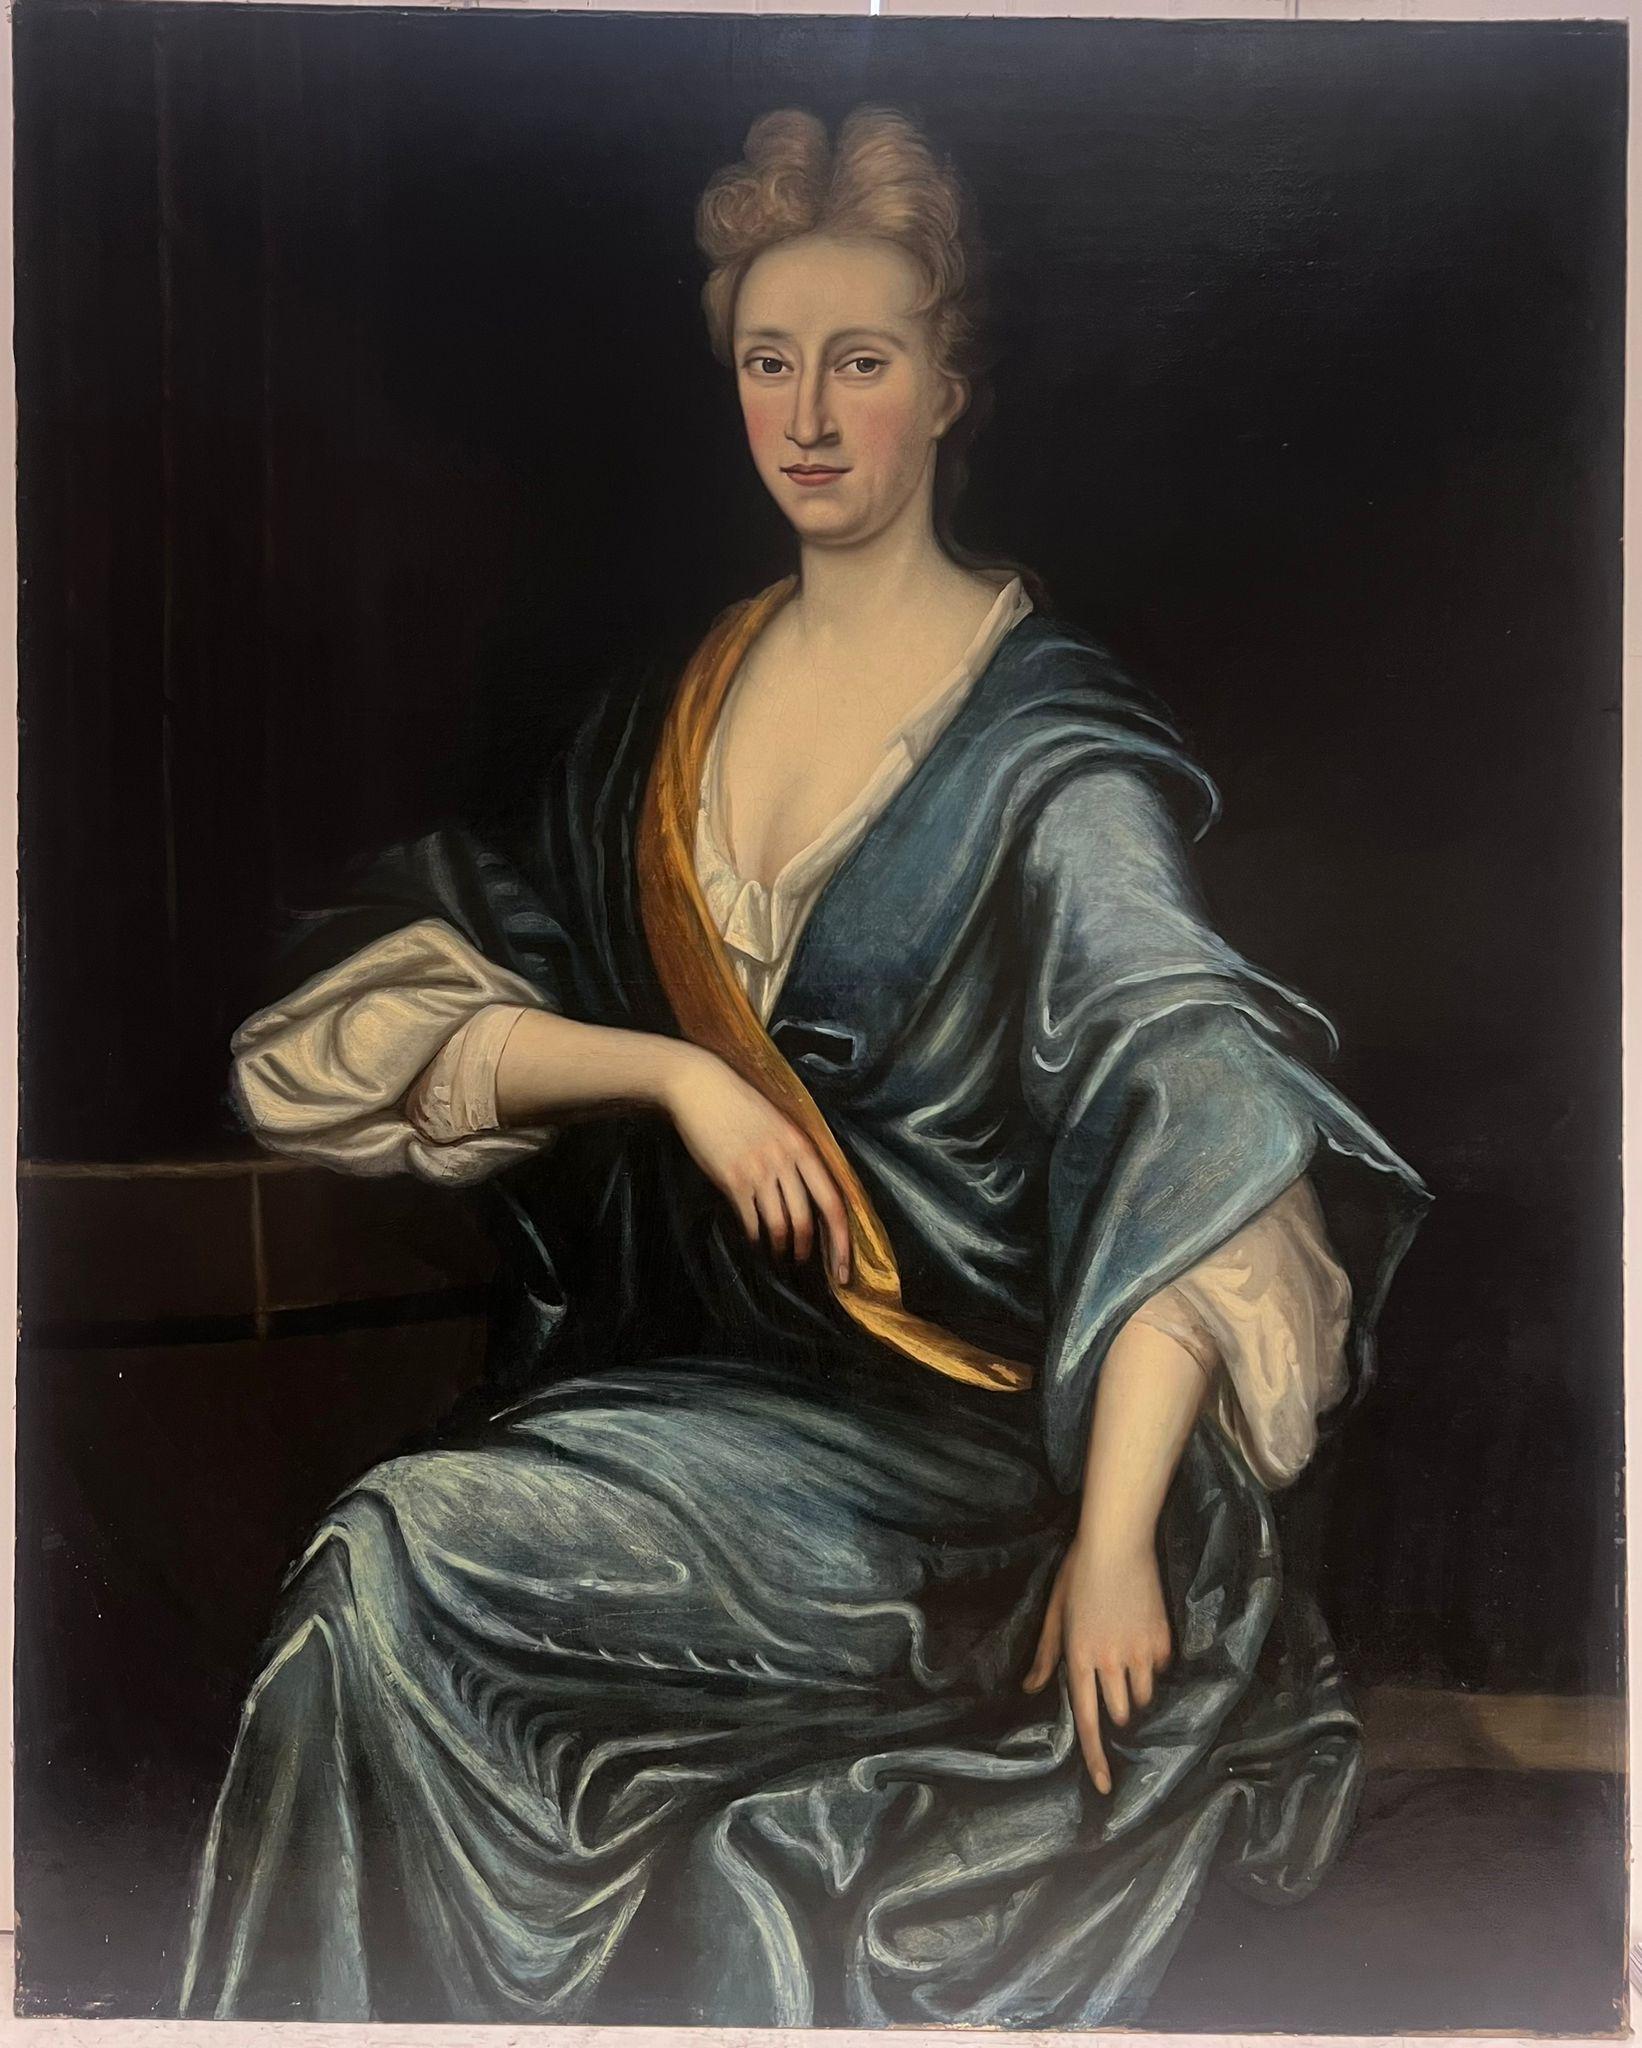 Portrait of a Noble Lady
circa 1700
circle of John Closterman (German 1660-1711)
oil on canvas, unframed
canvas : 50 x 40 inches
provenance: private collection, Somerset, England
condition: very good and sound condition, relined canvas.